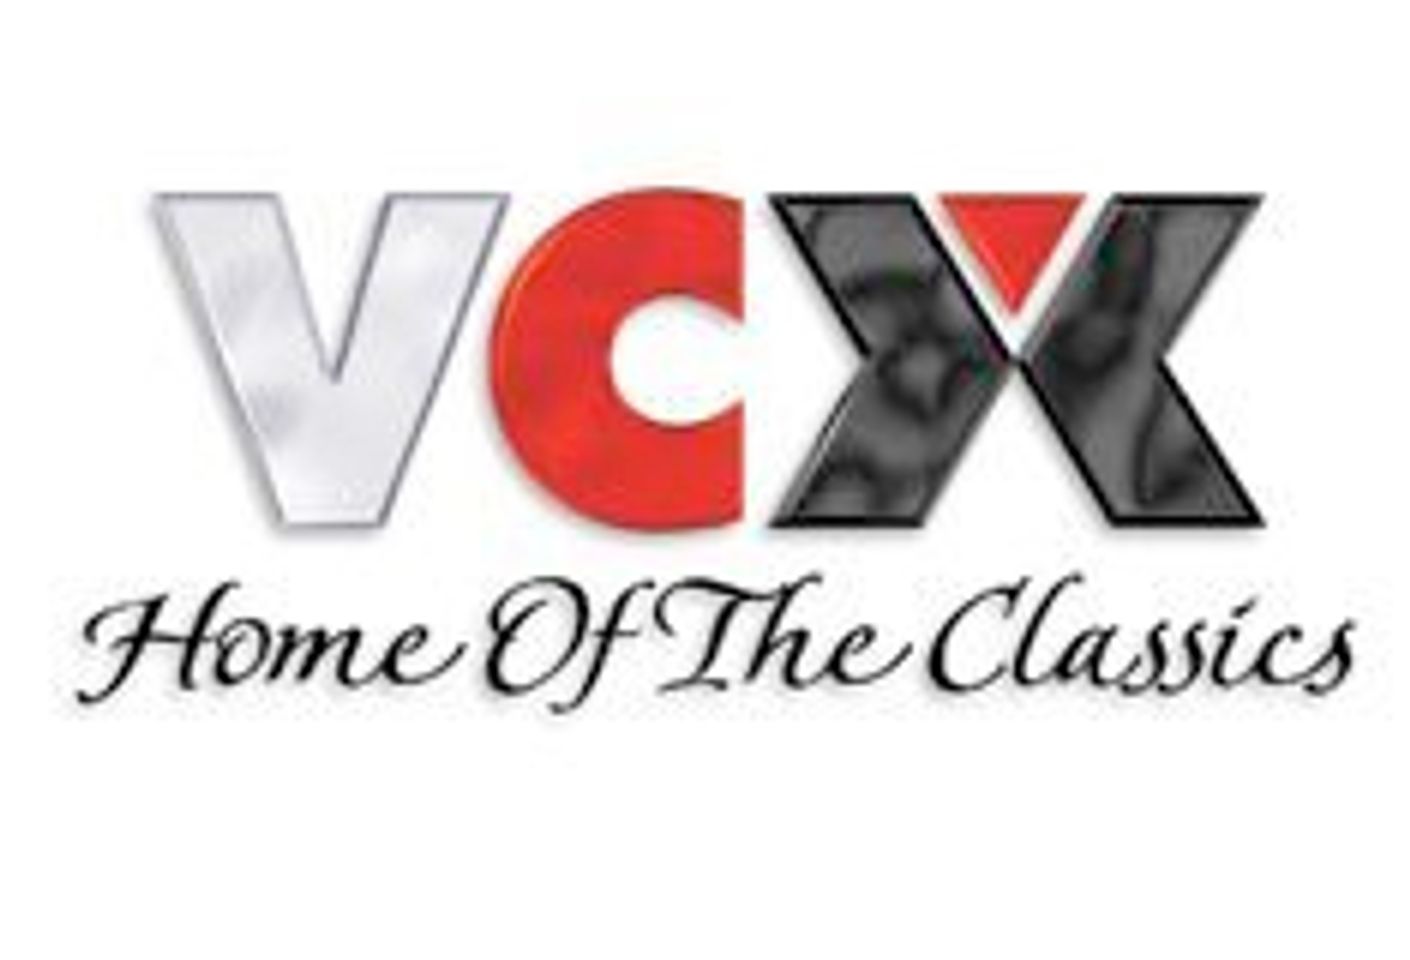 VCX Celebrates Spring With Classic Co-ed Titles